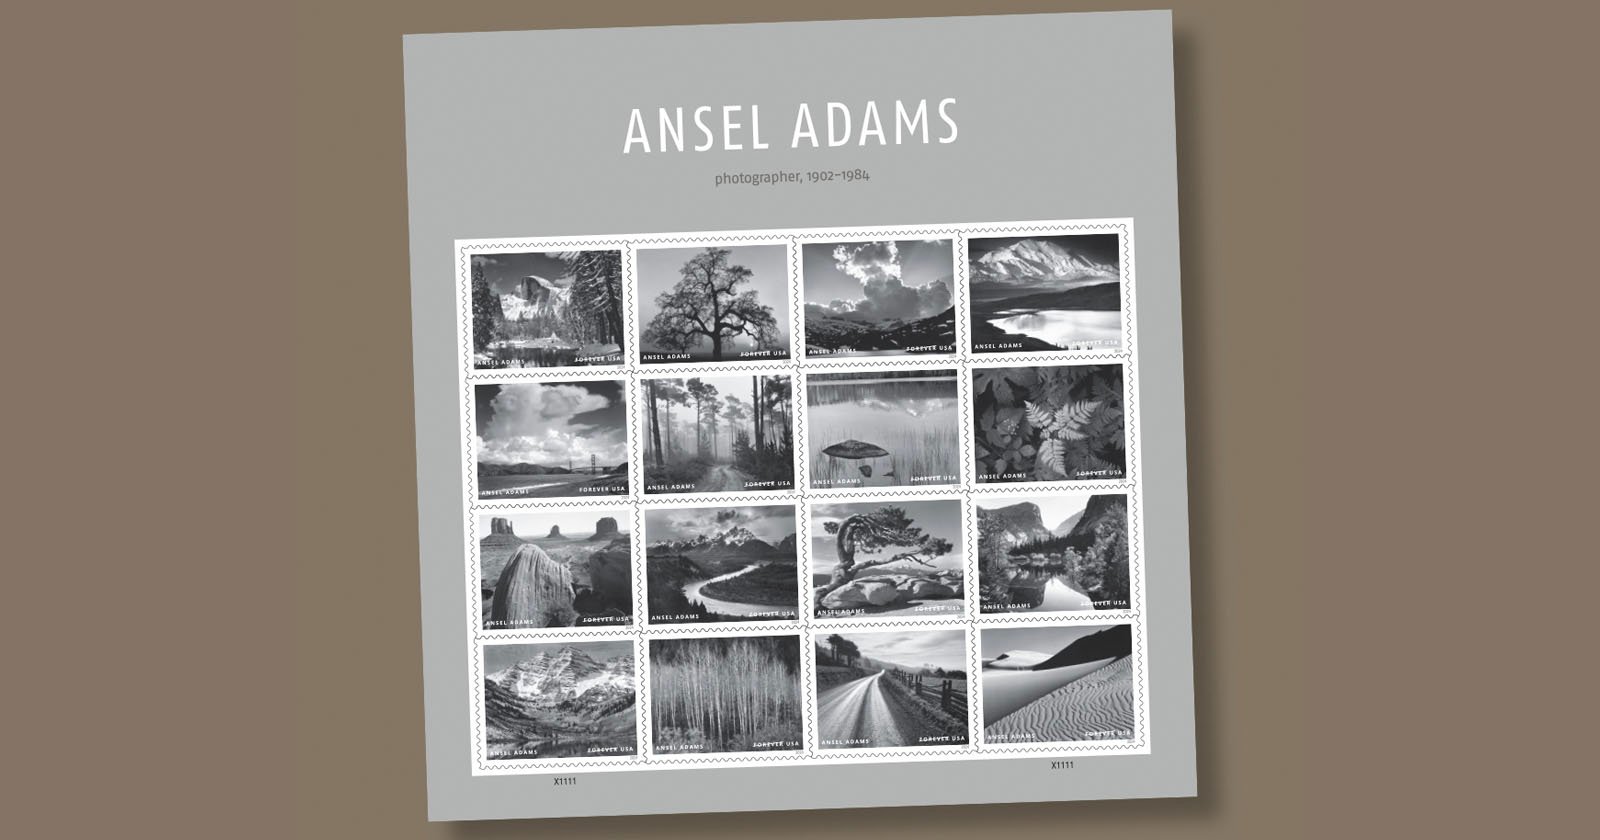  iconic ansel adams photos featured set usps stamps 